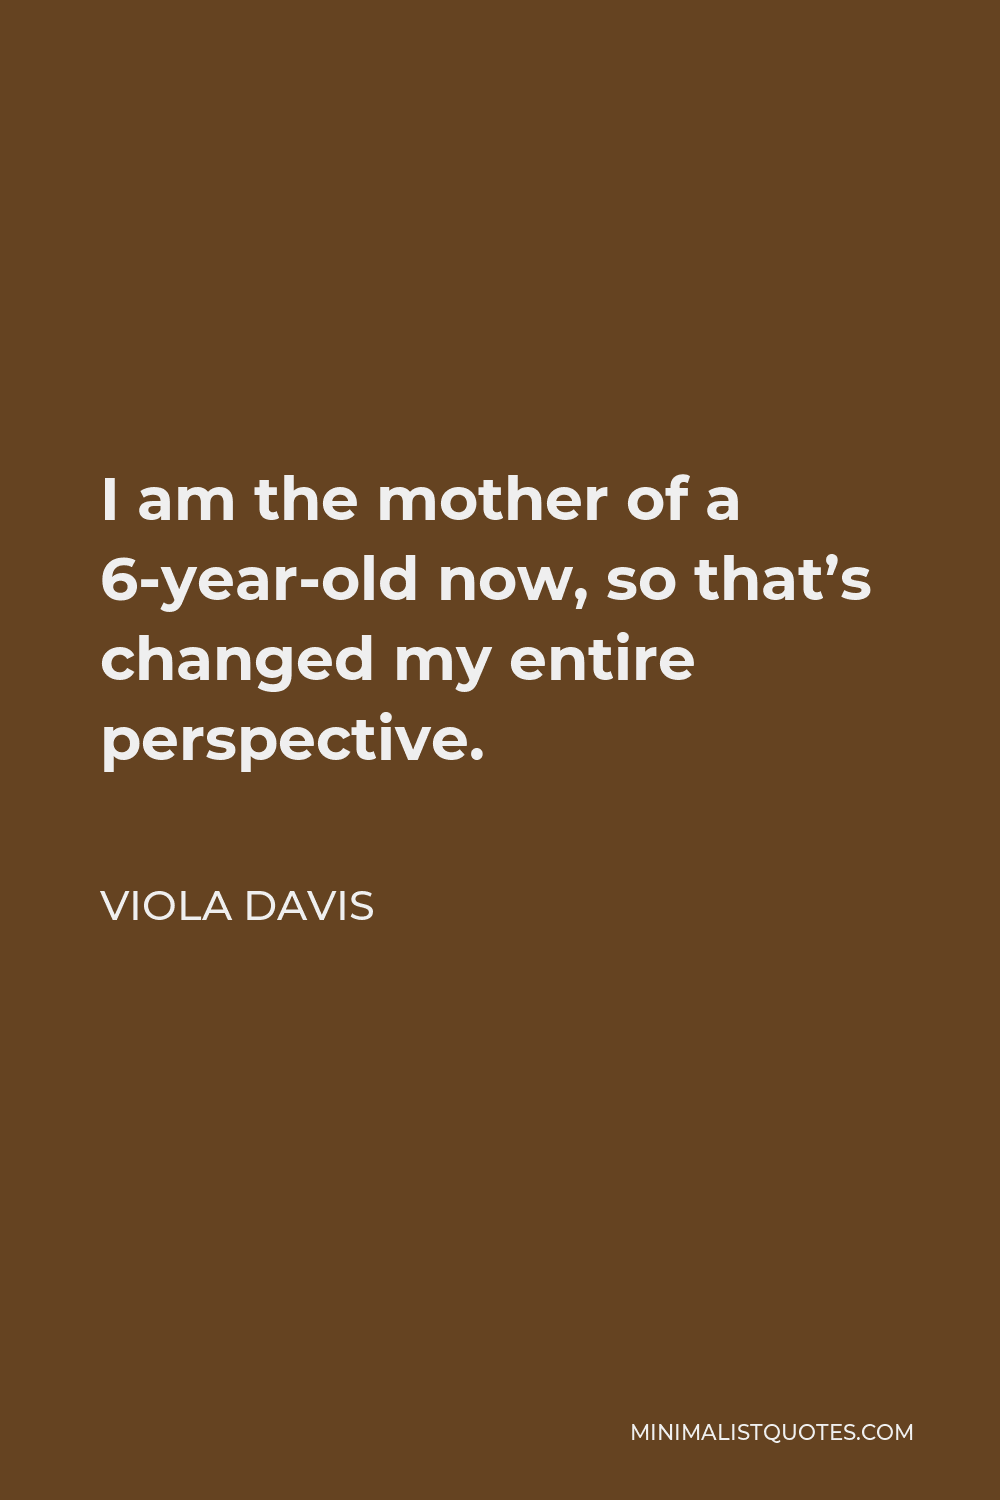 Viola Davis Quote - I am the mother of a 6-year-old now, so that’s changed my entire perspective.